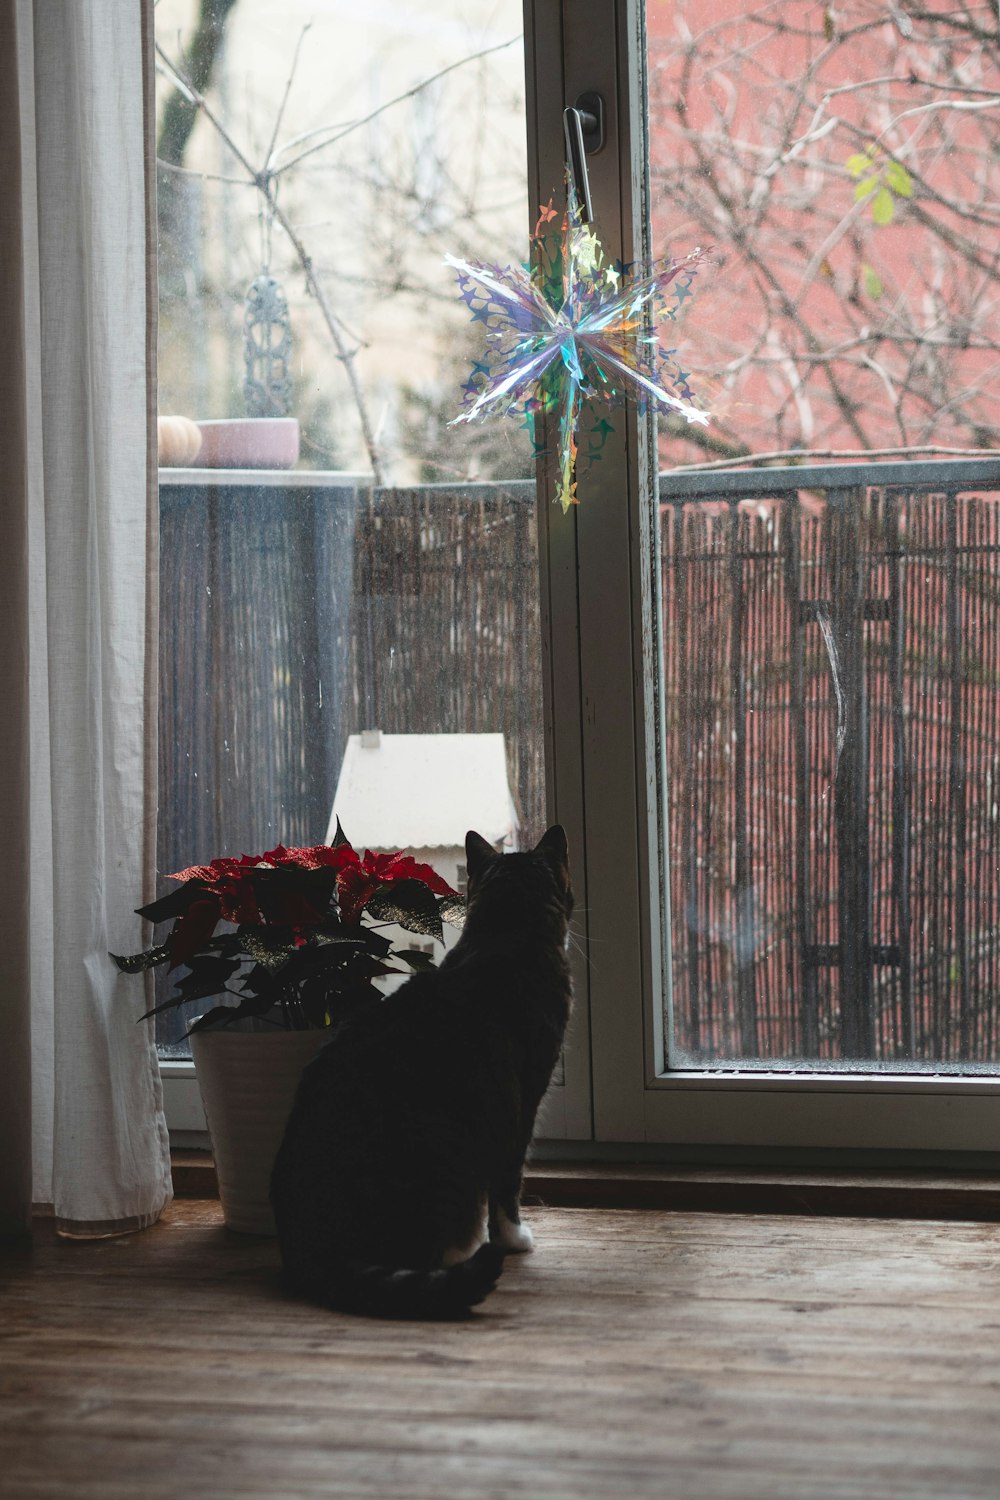 a black cat sitting in front of a window